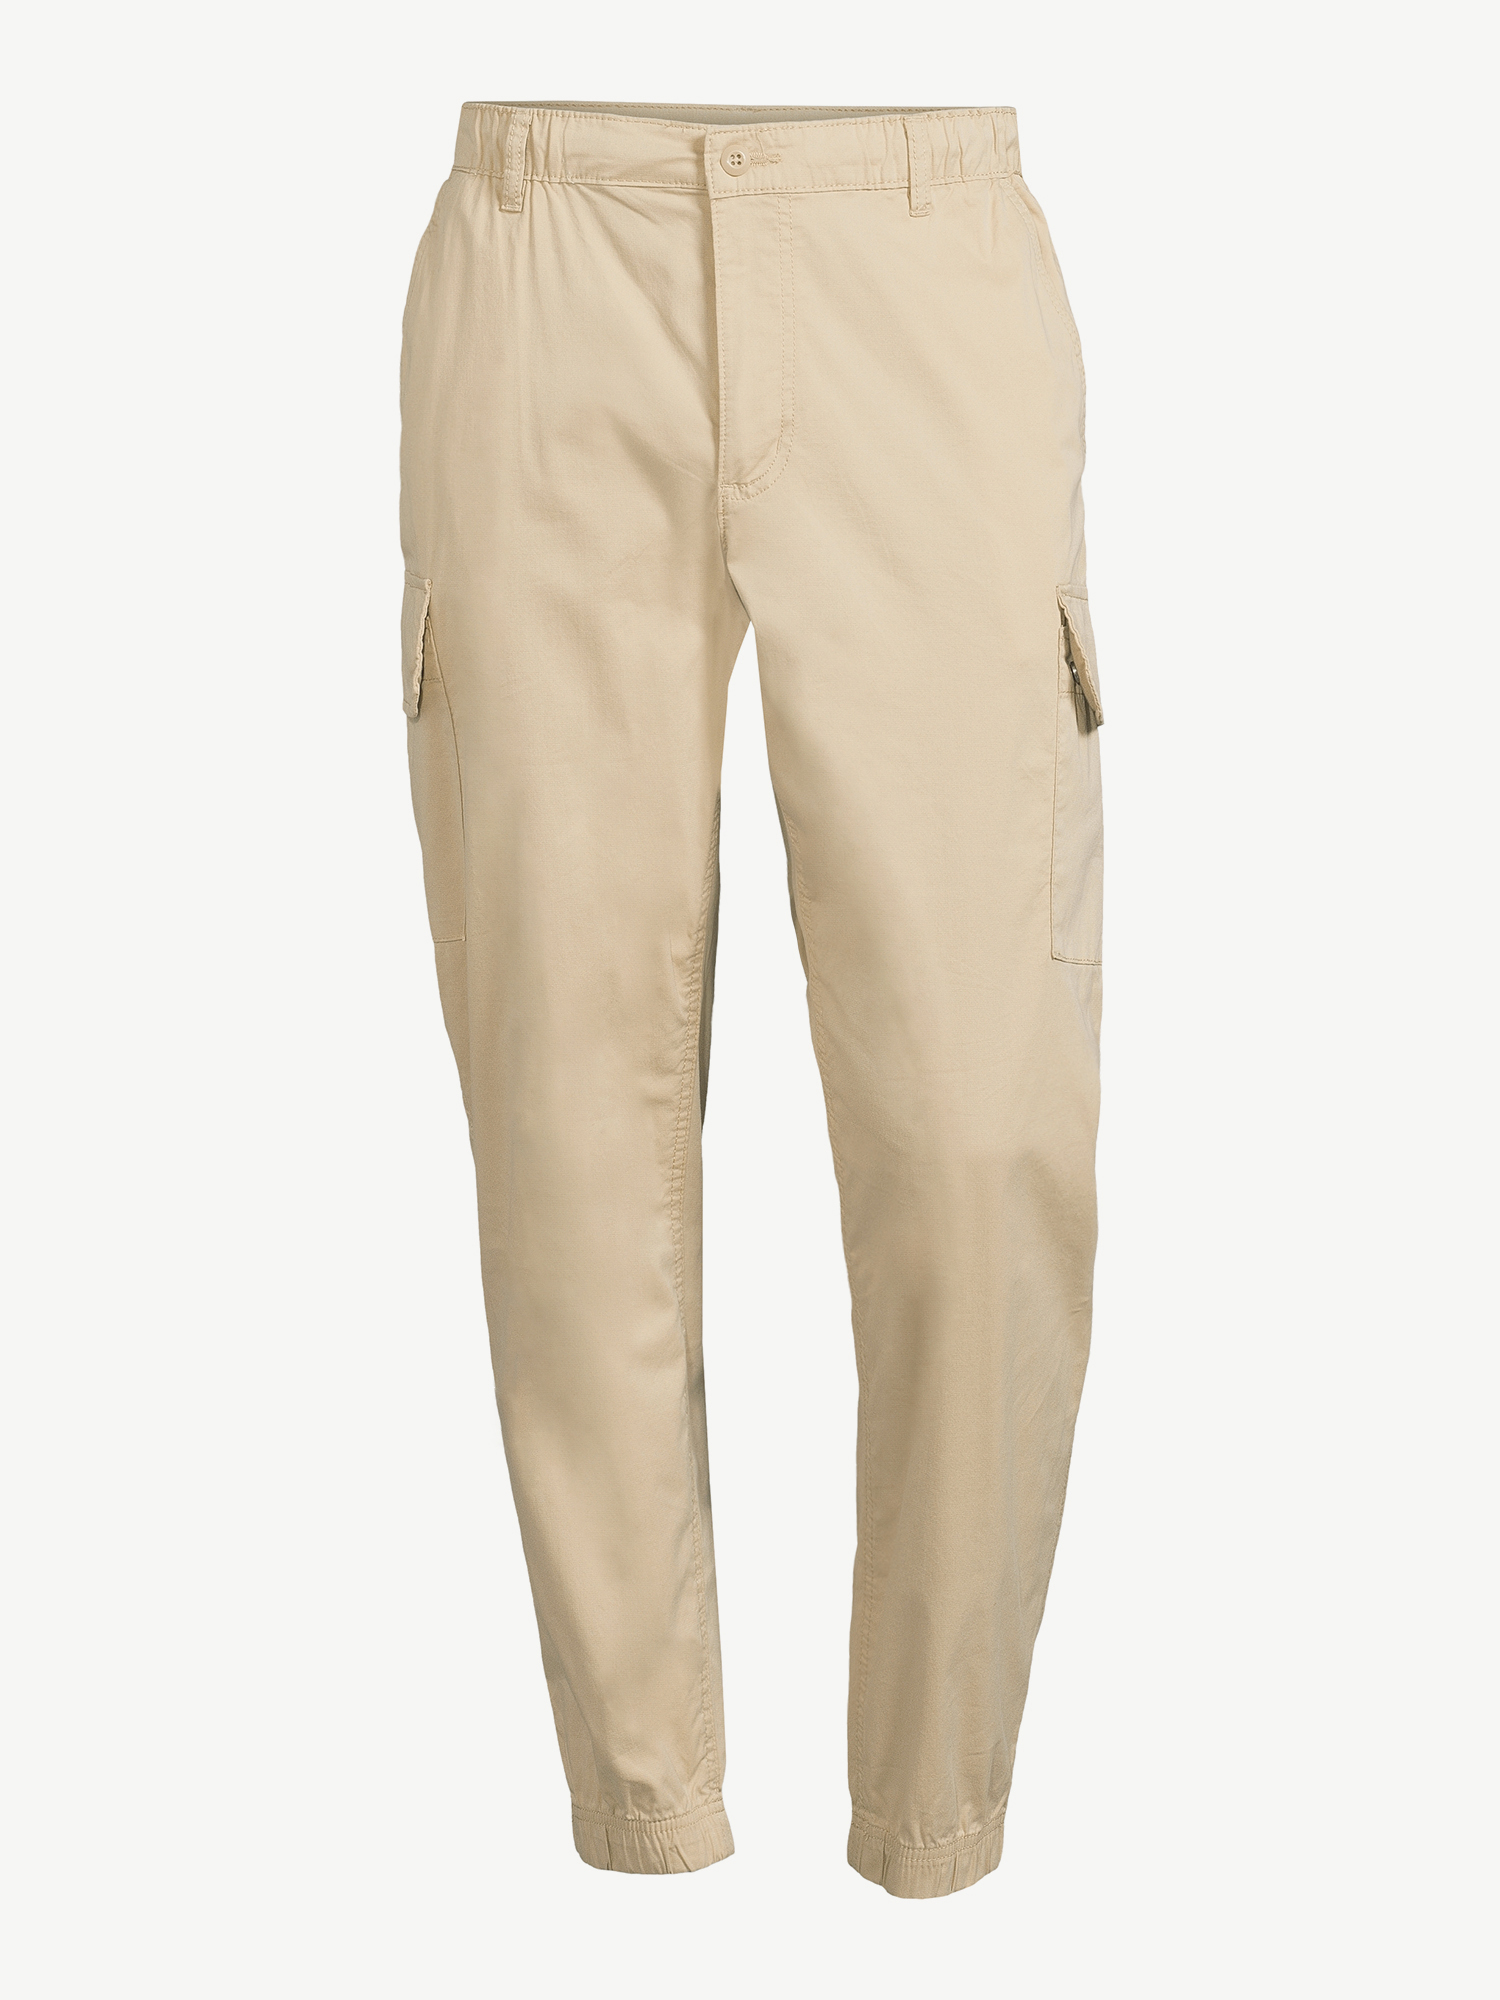 Free Assembly Men’s E-Waist Cargo Joggers - image 5 of 5